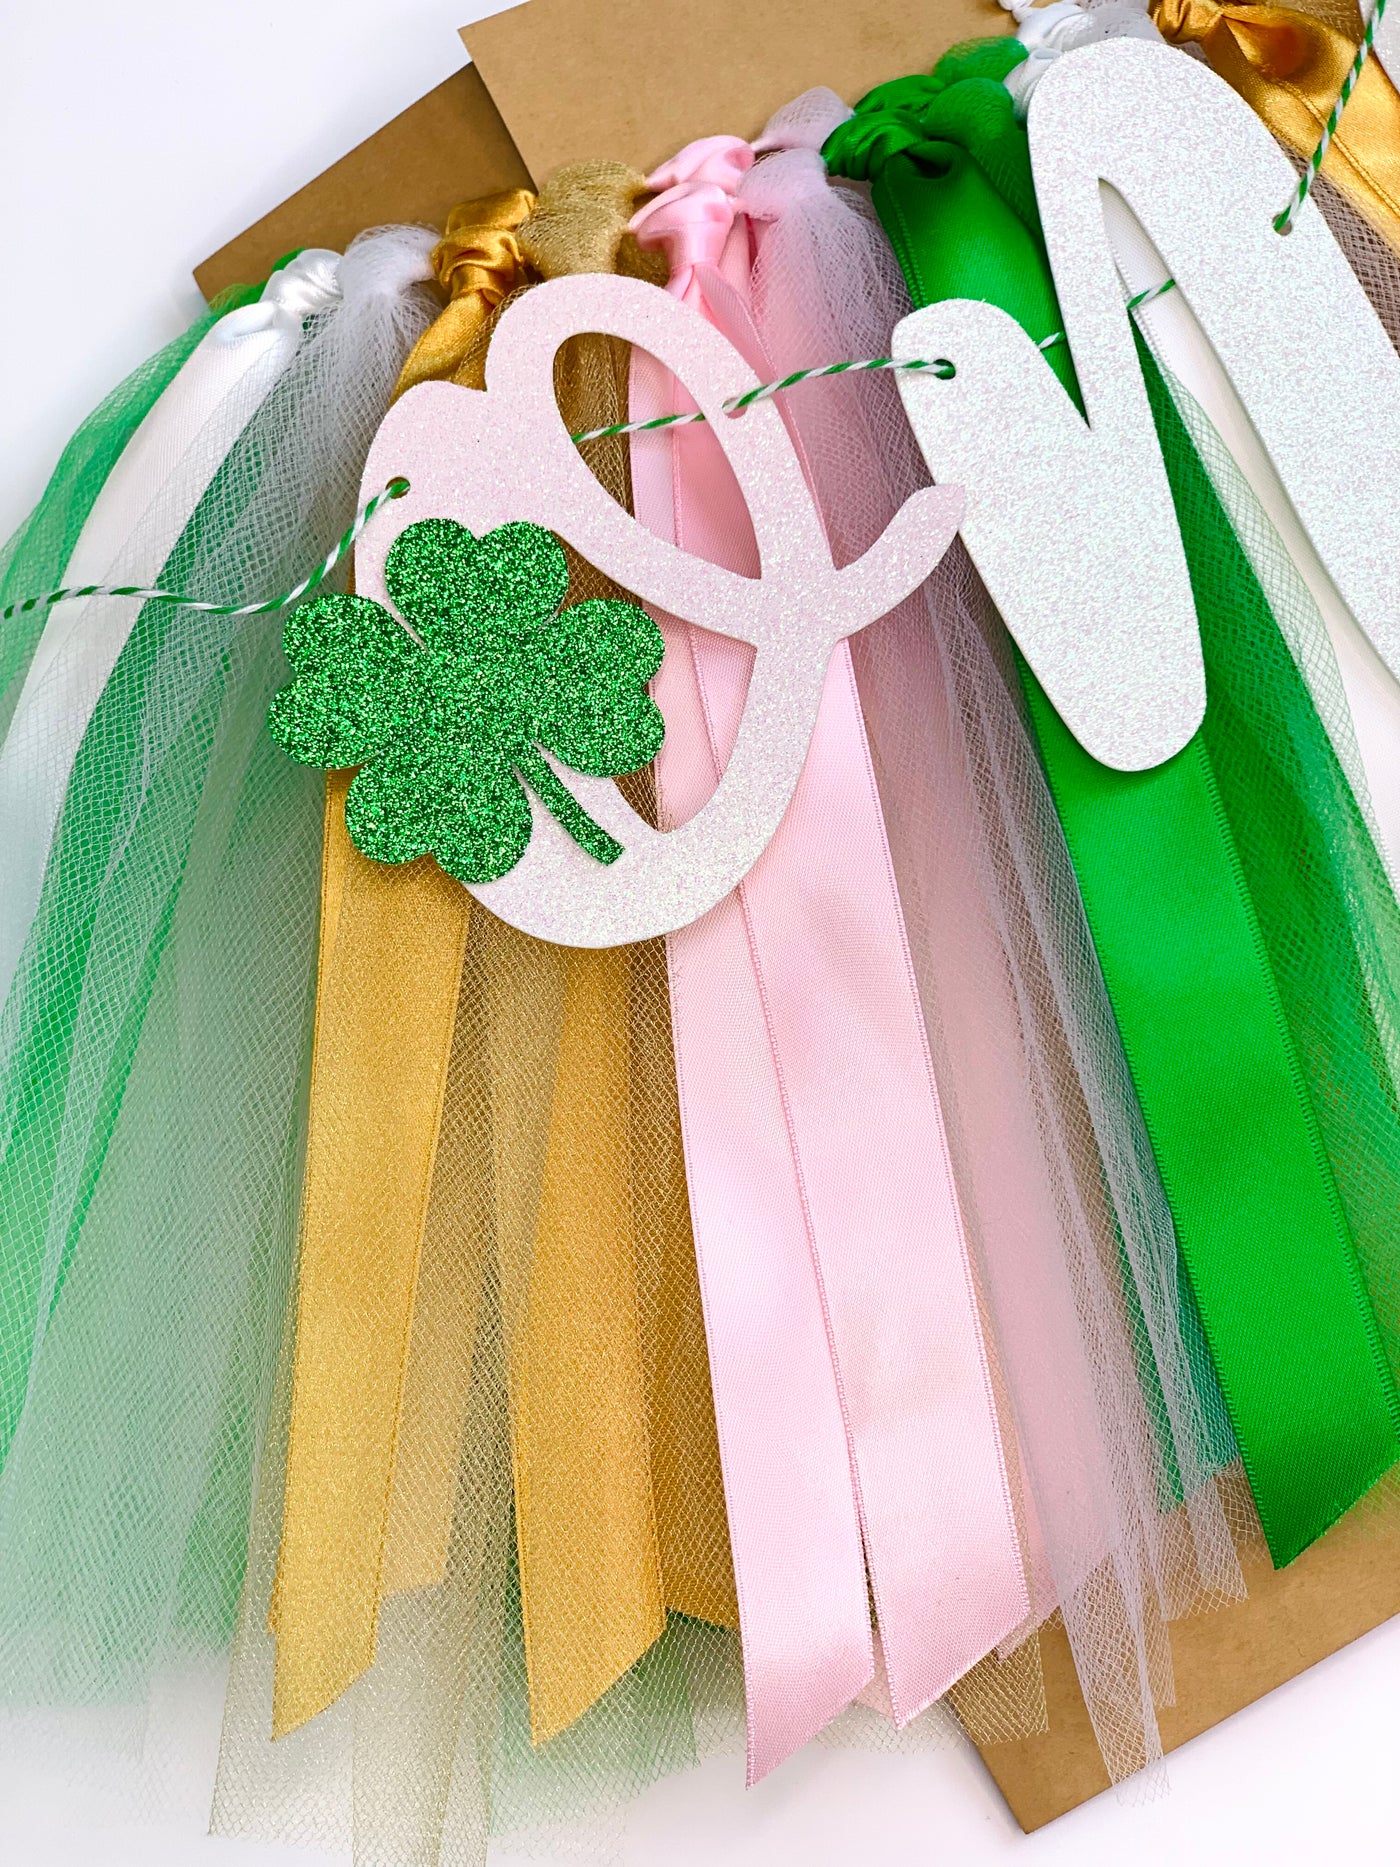 Lucky One St Patrick's Day First Birthday Theme. Green, White, Pink and Gold High Chair Tutu Skirt Banner GDPK